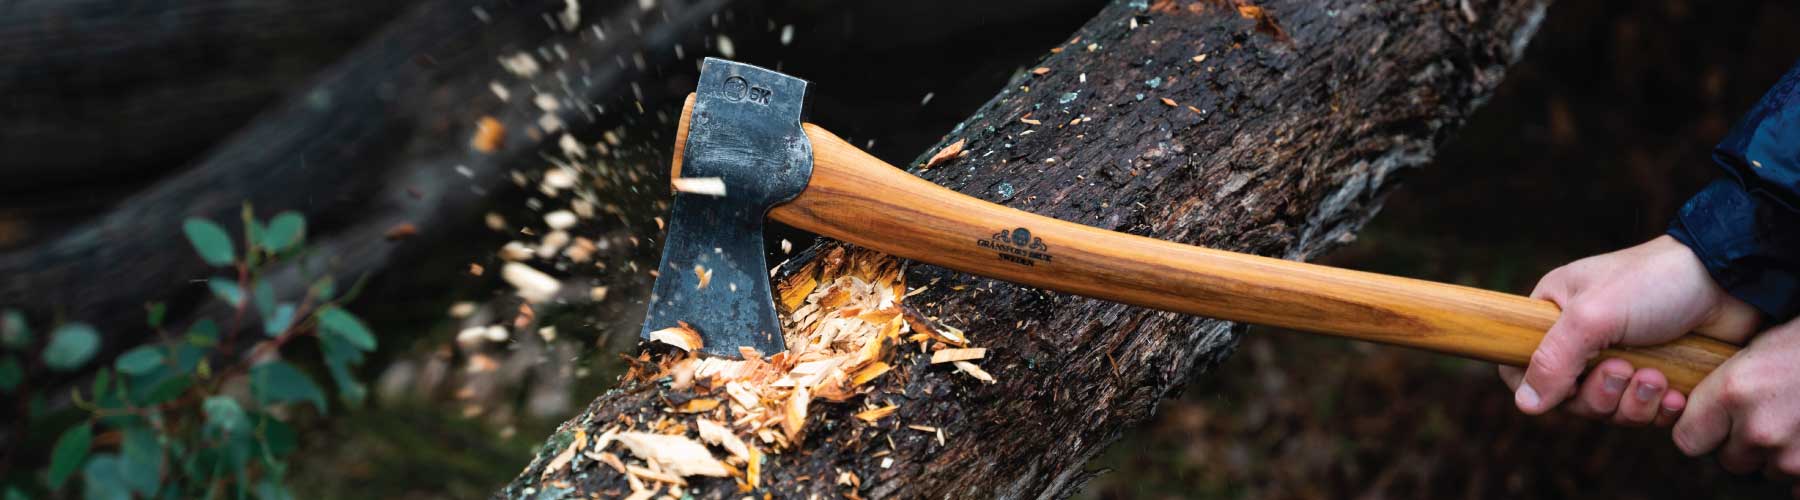 Japanese All-purpose Hatchet with Fire-hardened Handle, Forest & Outdoor  Axes